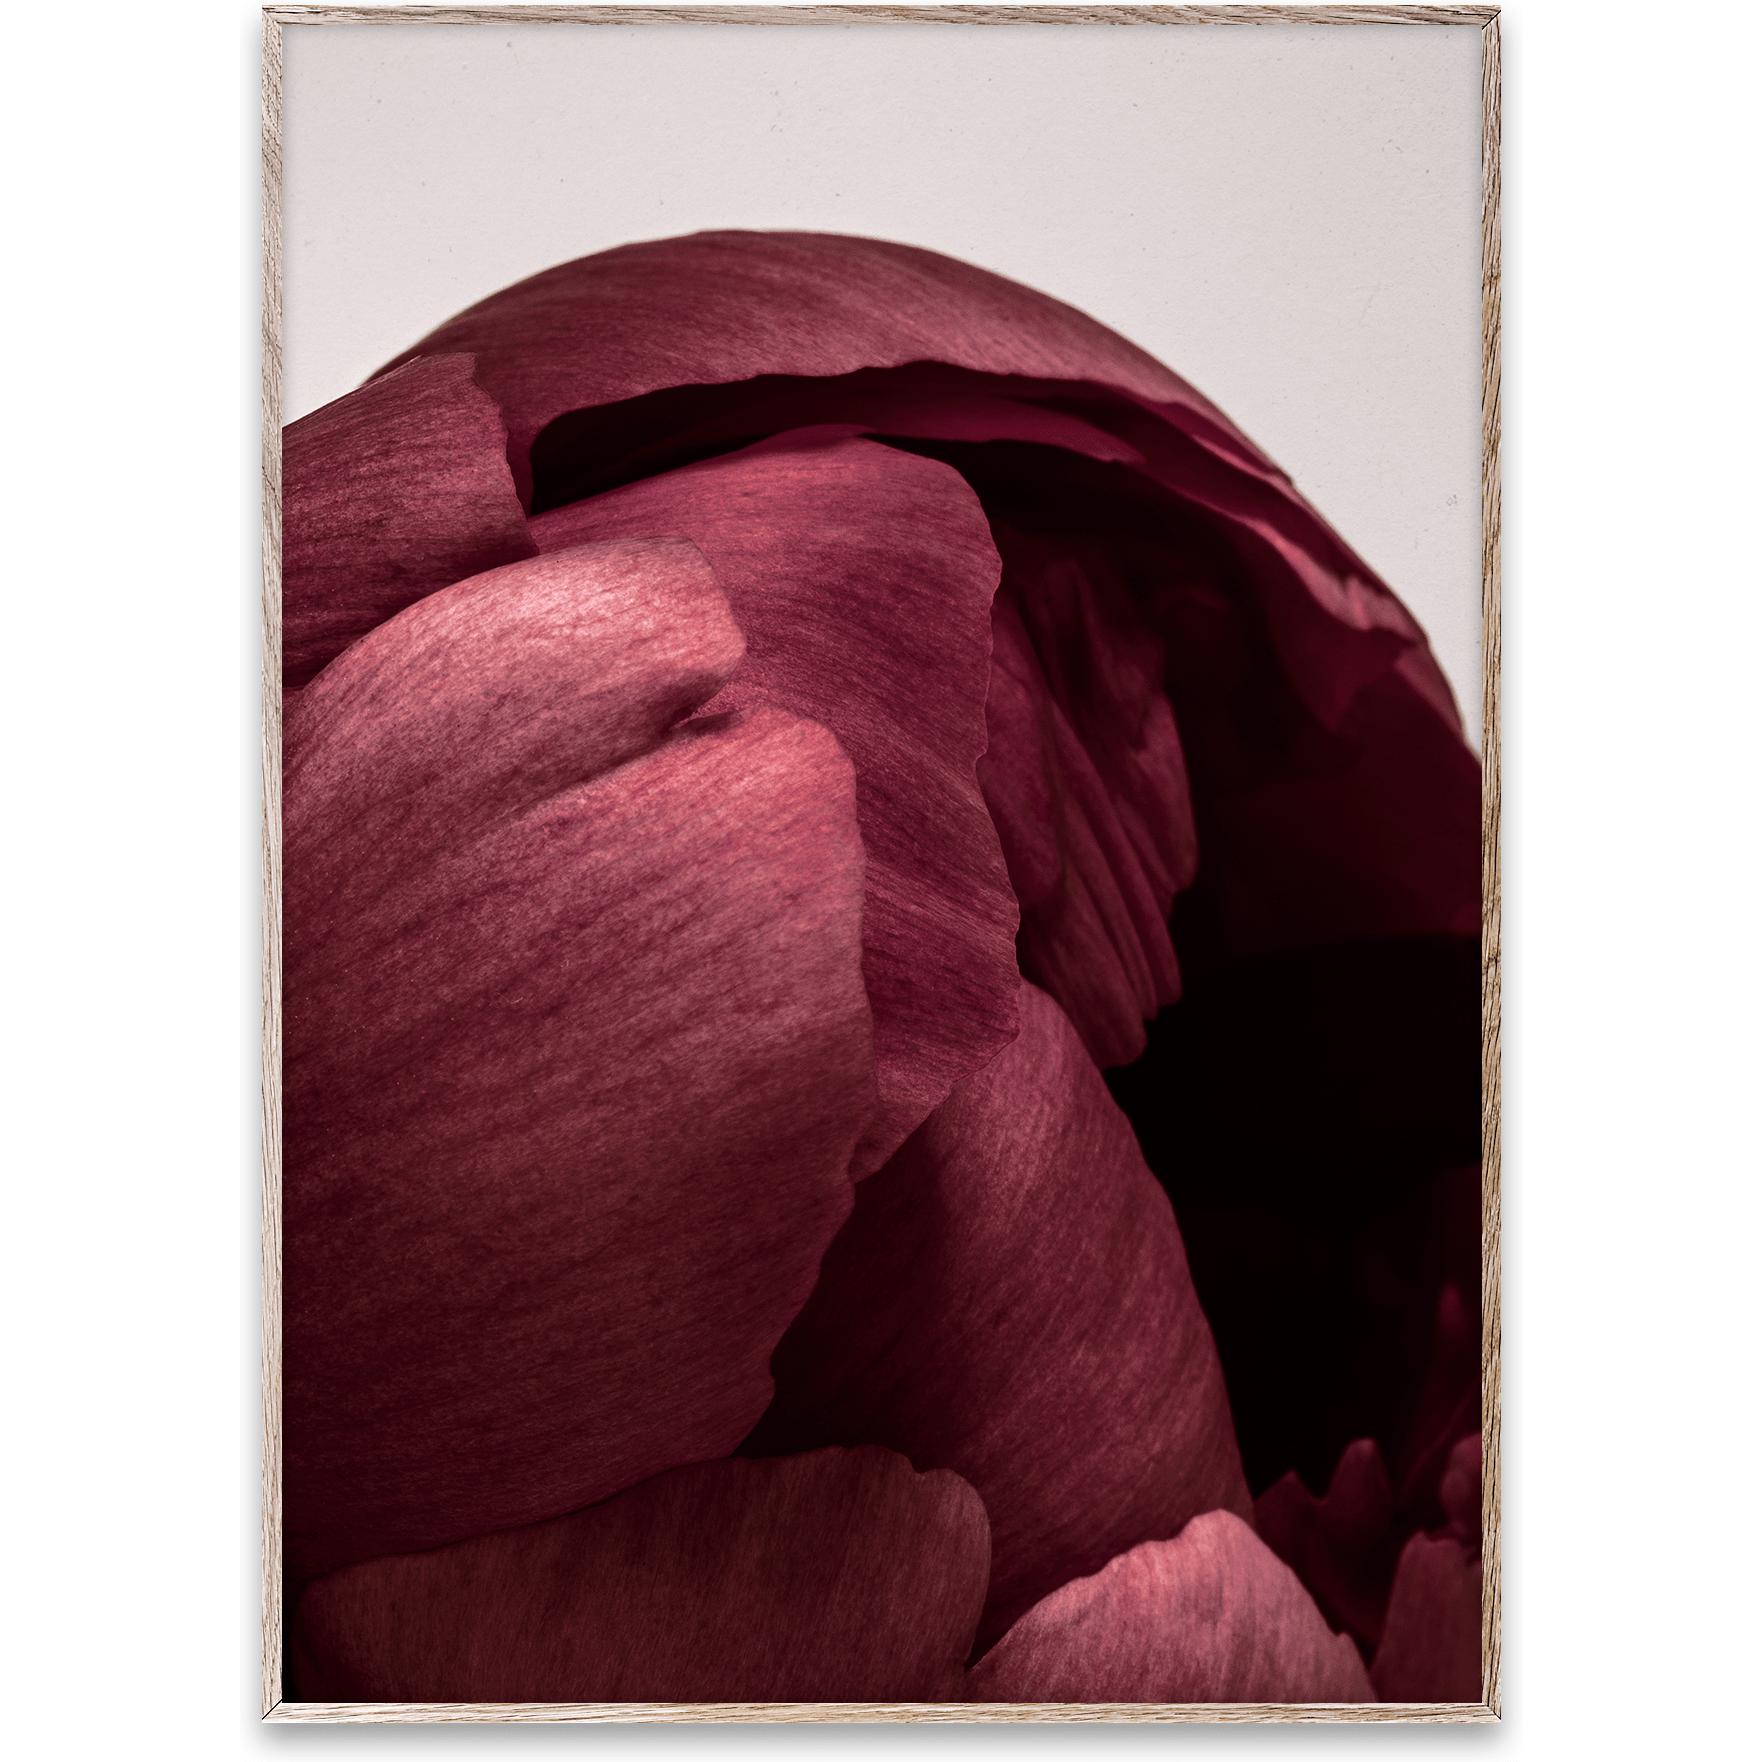 Paper Collective Peonia 01 Affiche, 50x70 cm